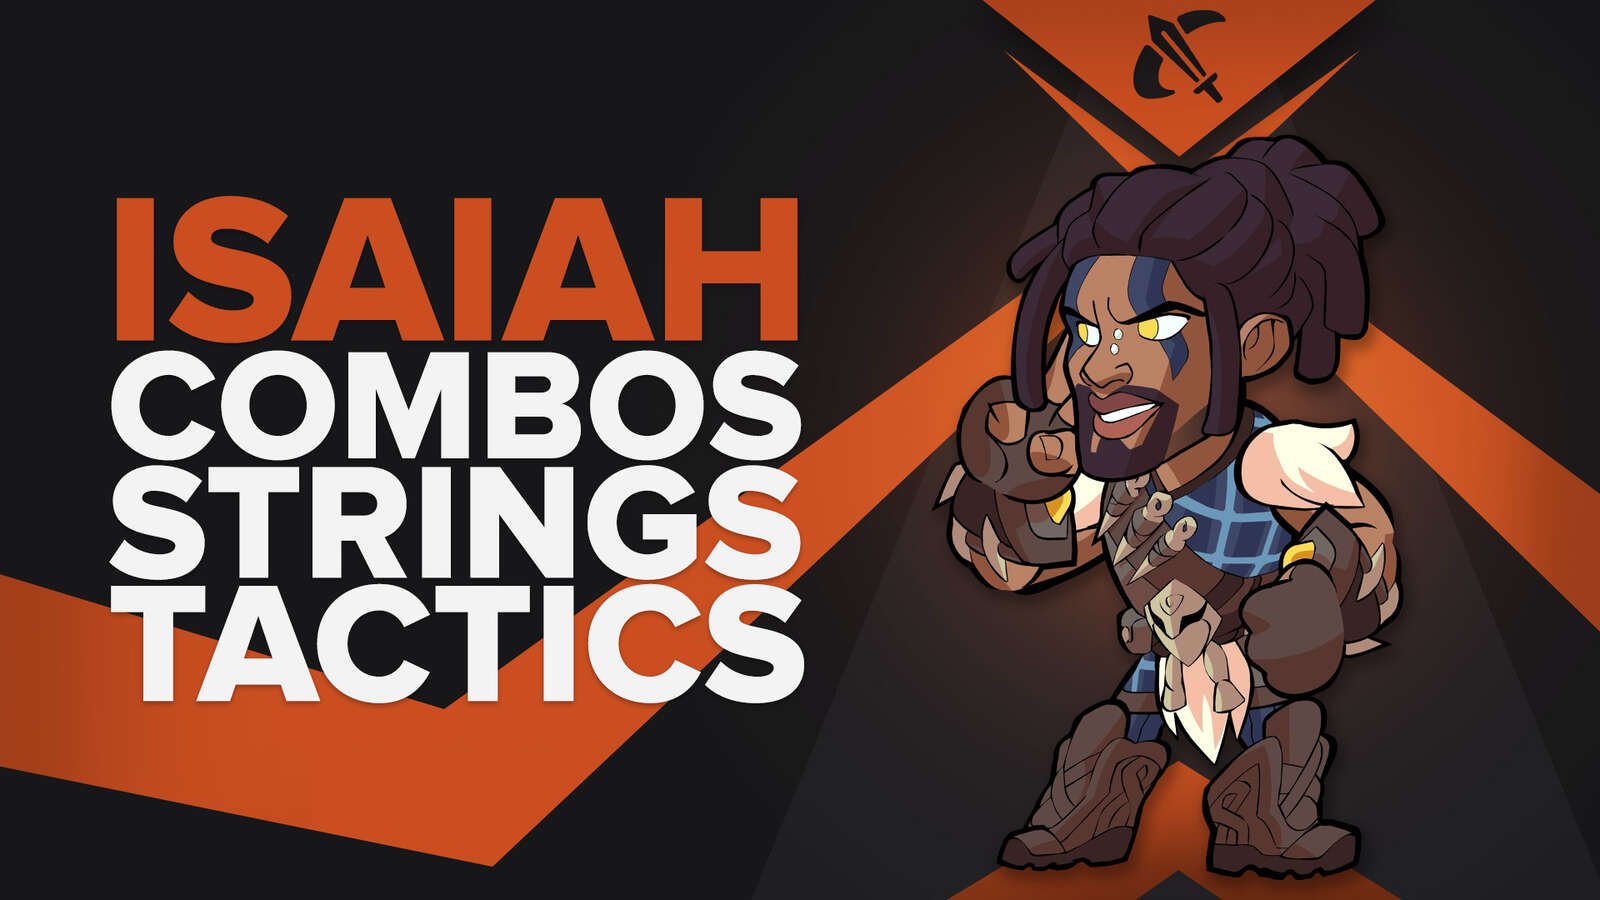 Best Isaiah combos, strings and tips in Brawlhalla